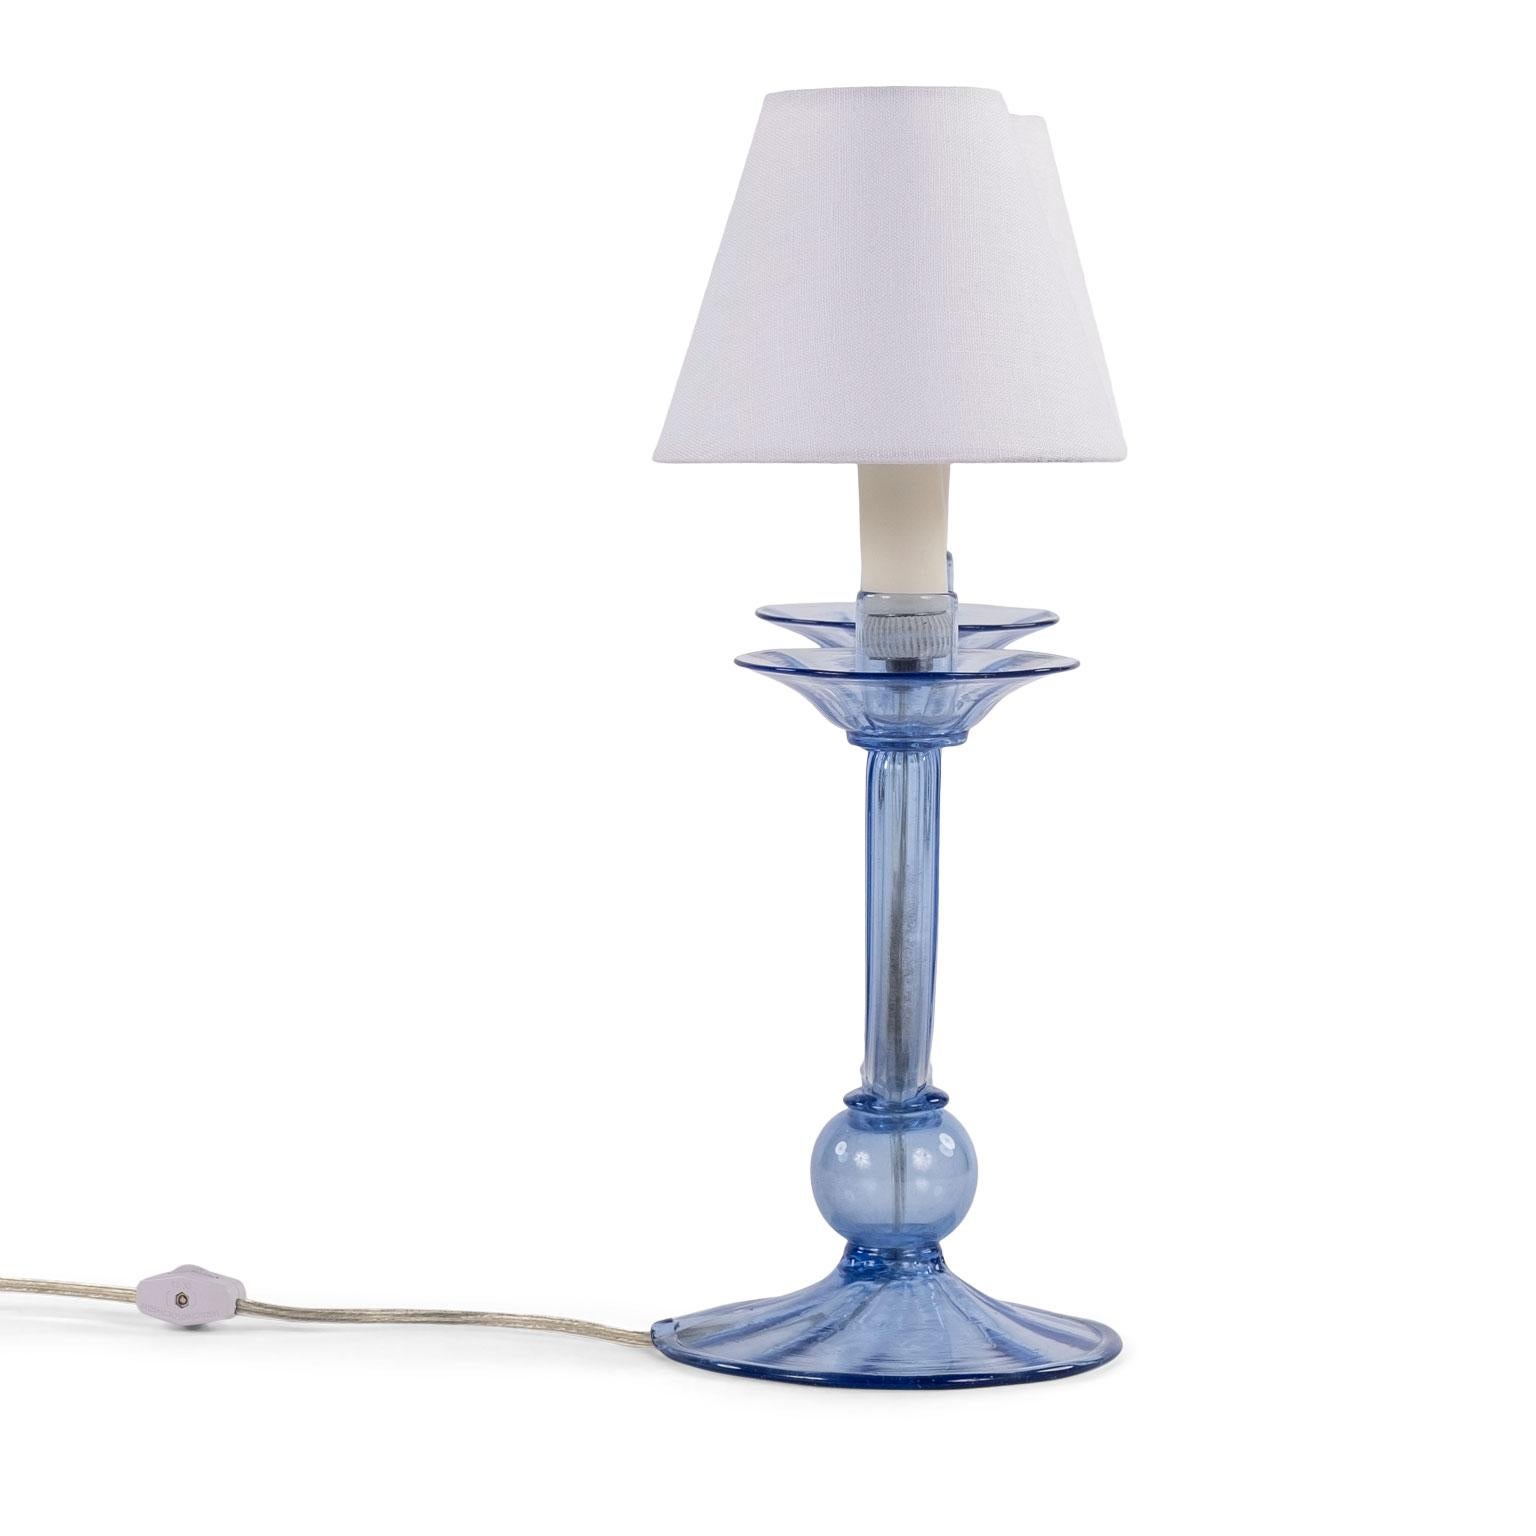 Blue Murano glass candelabra newly wired as table lamp. For use within the USA using UL listed parts. Includes shades (measurements include shades).